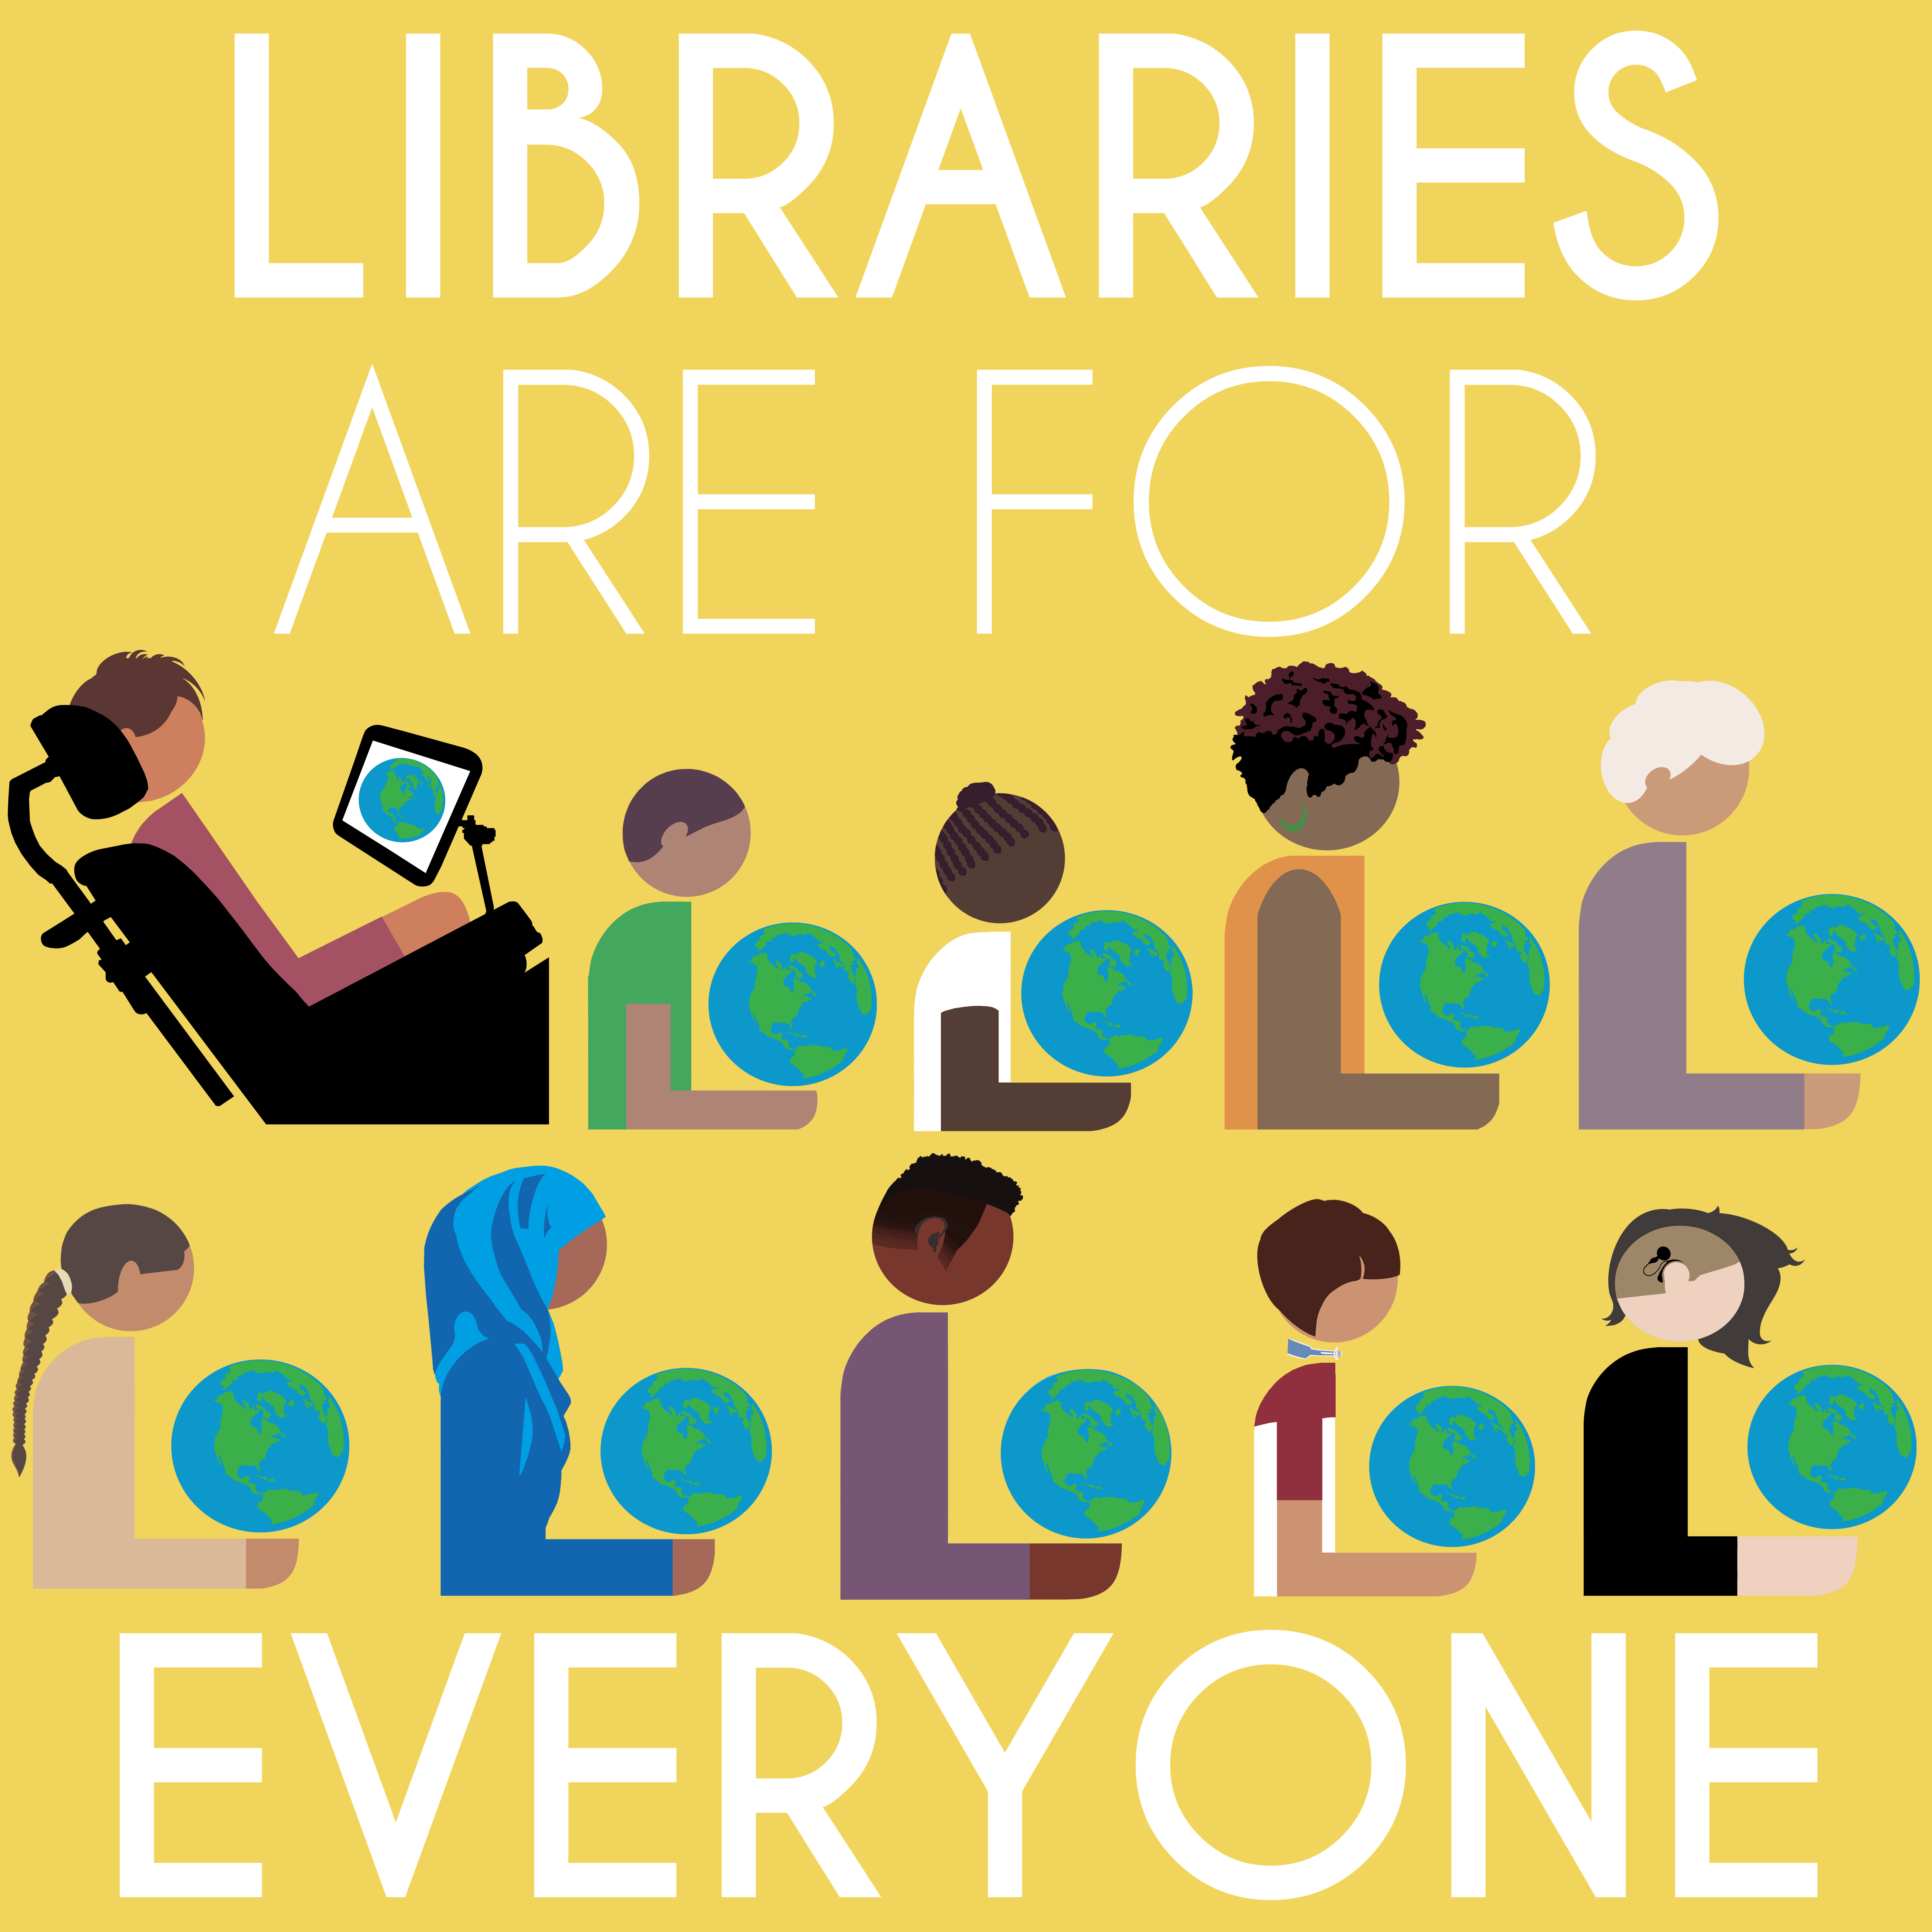 libraries are for everyone sign with a yellow background featuring 10 diverse representations of library patrons